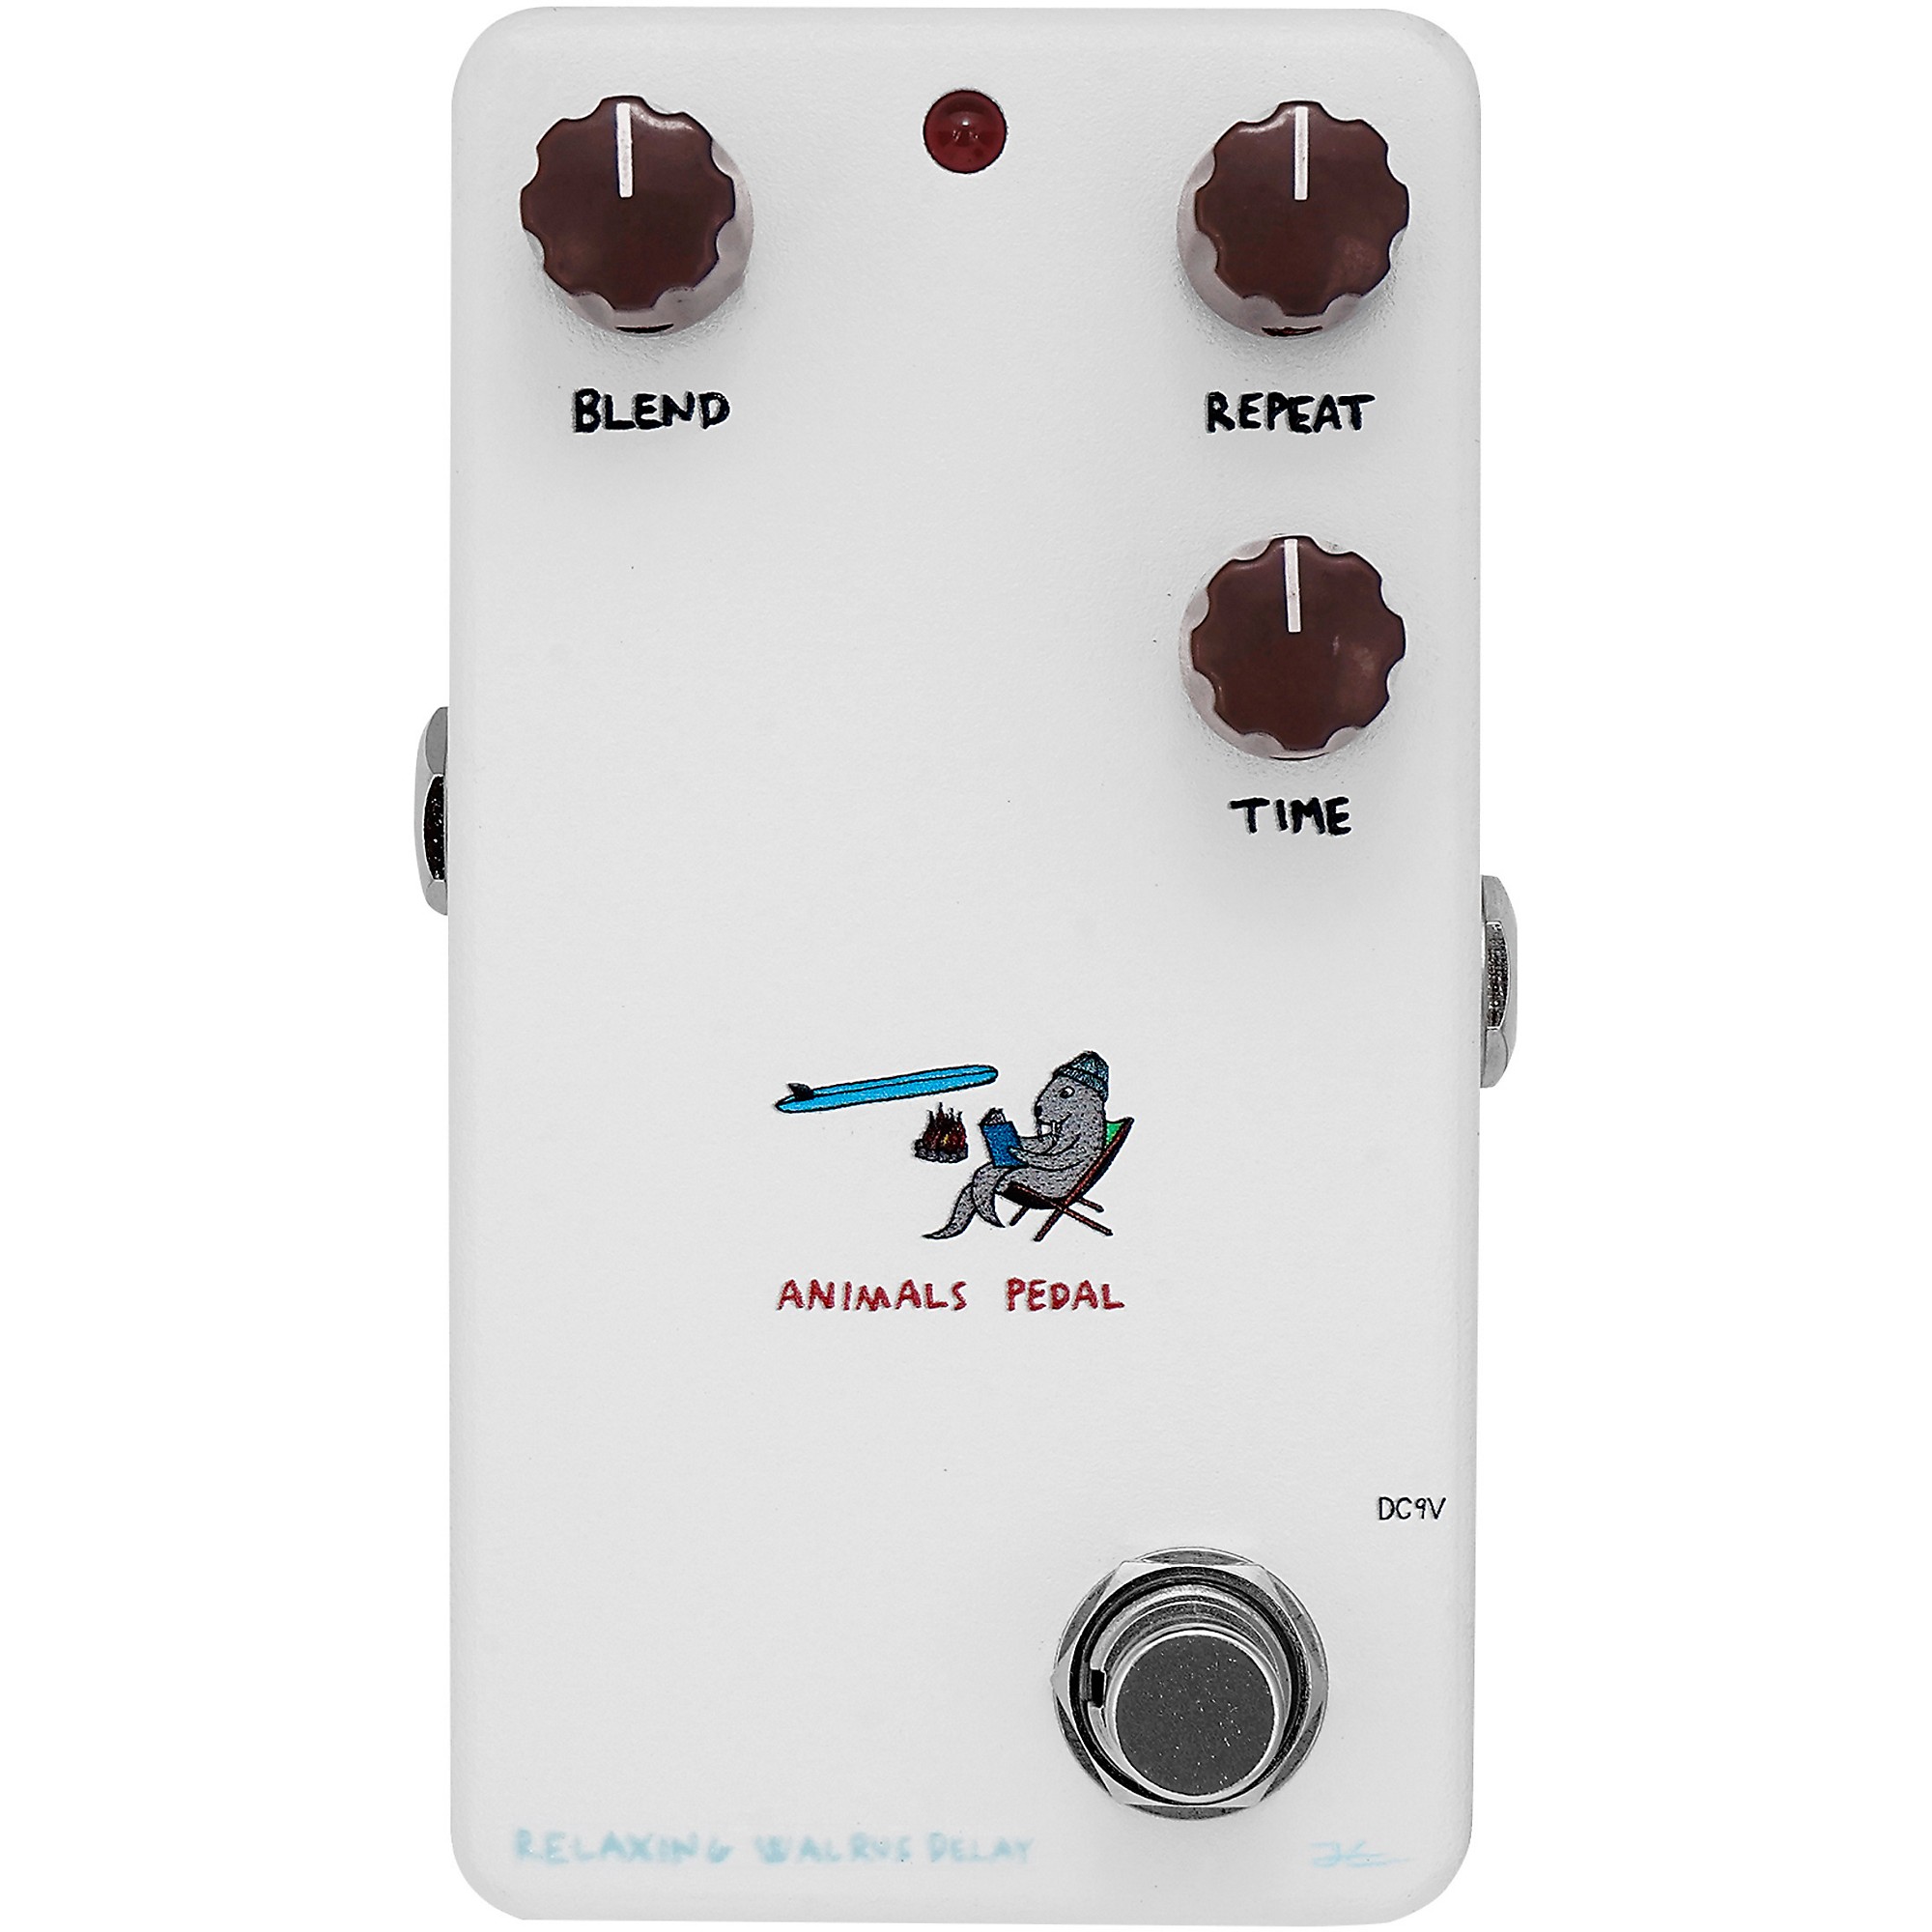 Animals Pedal Relaxing Walrus Delay V2 Effects Pedal White | Guitar Center